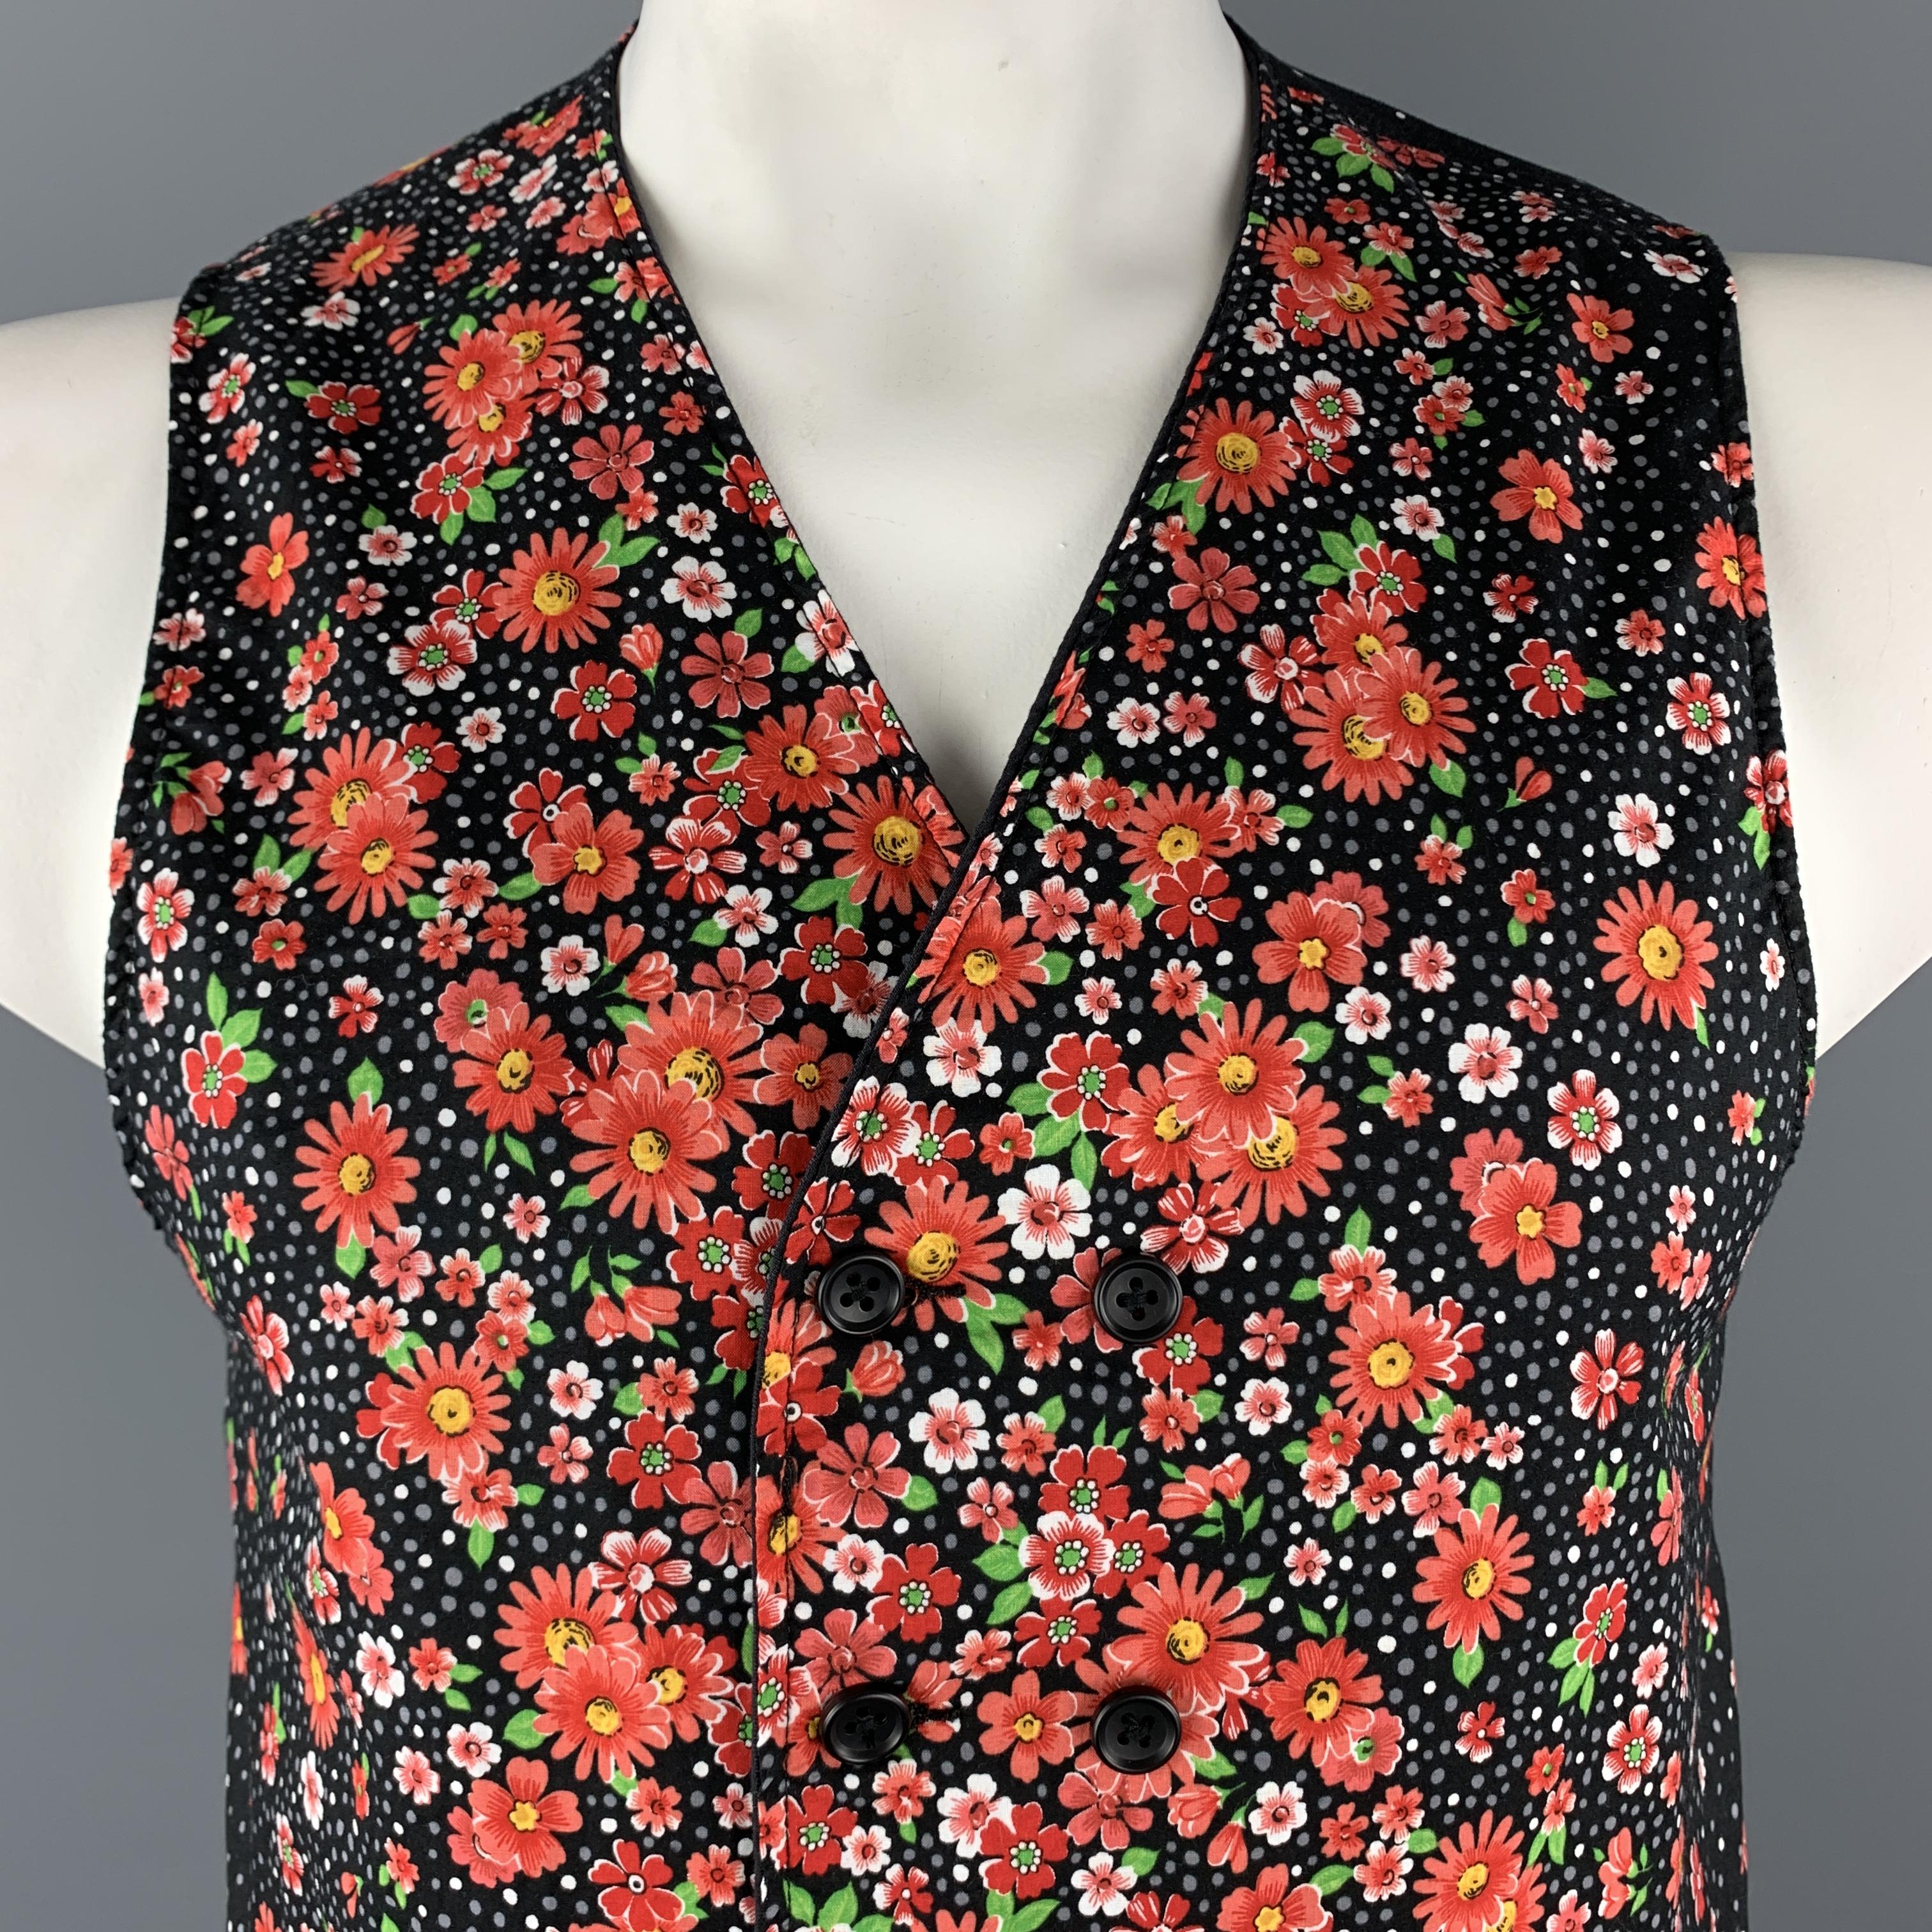 ENGINEERED GARMENTS reversible vest comes in black and red floral print cotton with a double breasted button front and solid reverse side. Made in USA.

New with Tags. 
Marked: L

Measurements:

Shoulder: 14 in.
Chest: 41 in.
Length: 26 in.